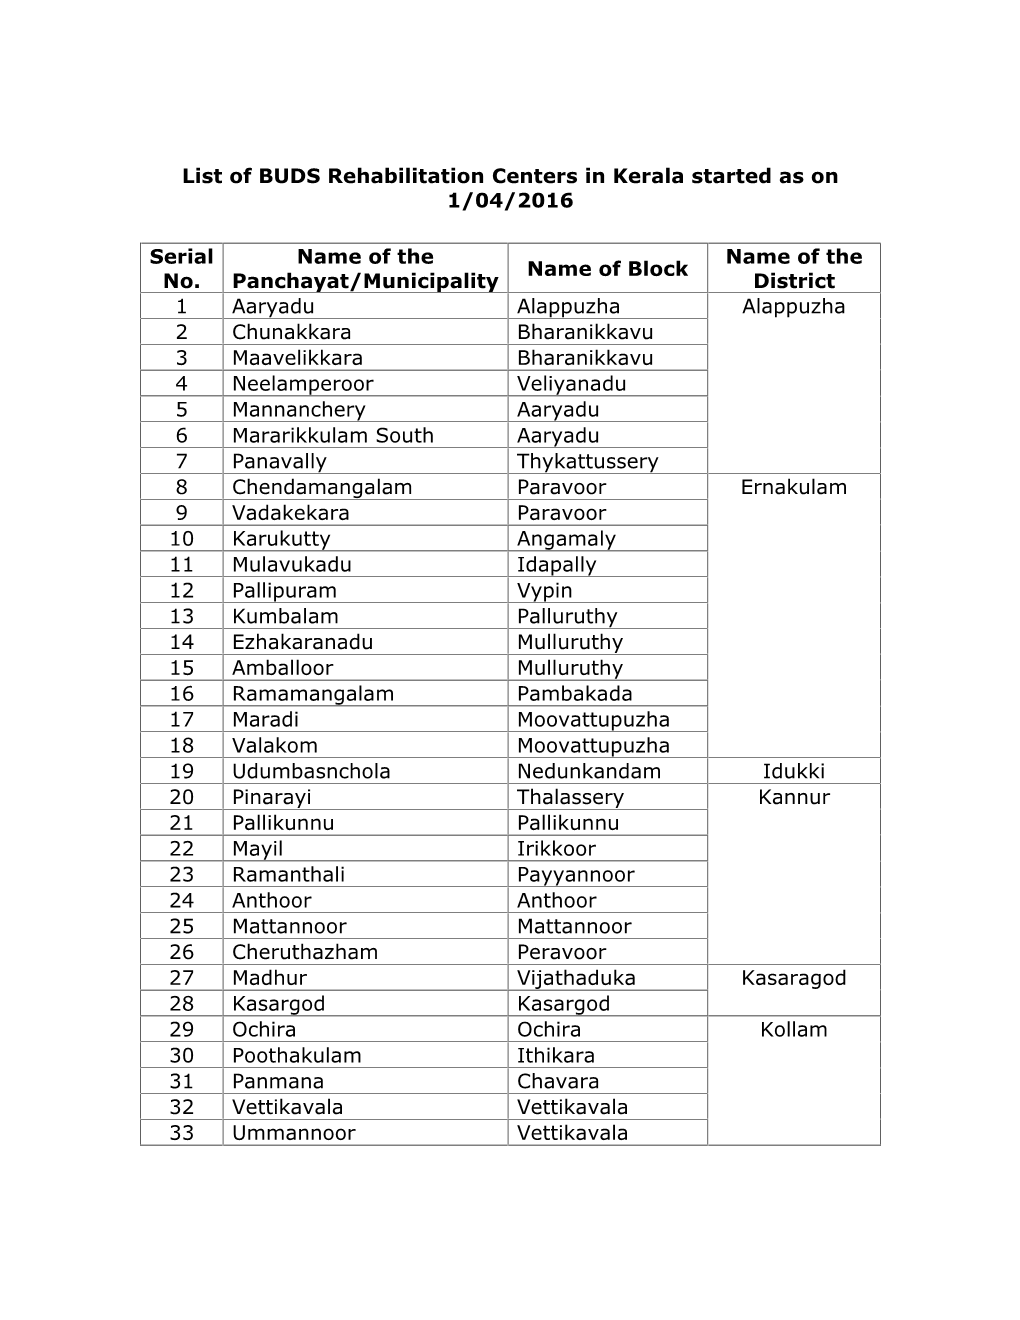 List of BUDS Rehabilitation Centers in Kerala Started As on 1/04/2016 Serial No. Name of the Panchayat/Municipality Name of Bloc